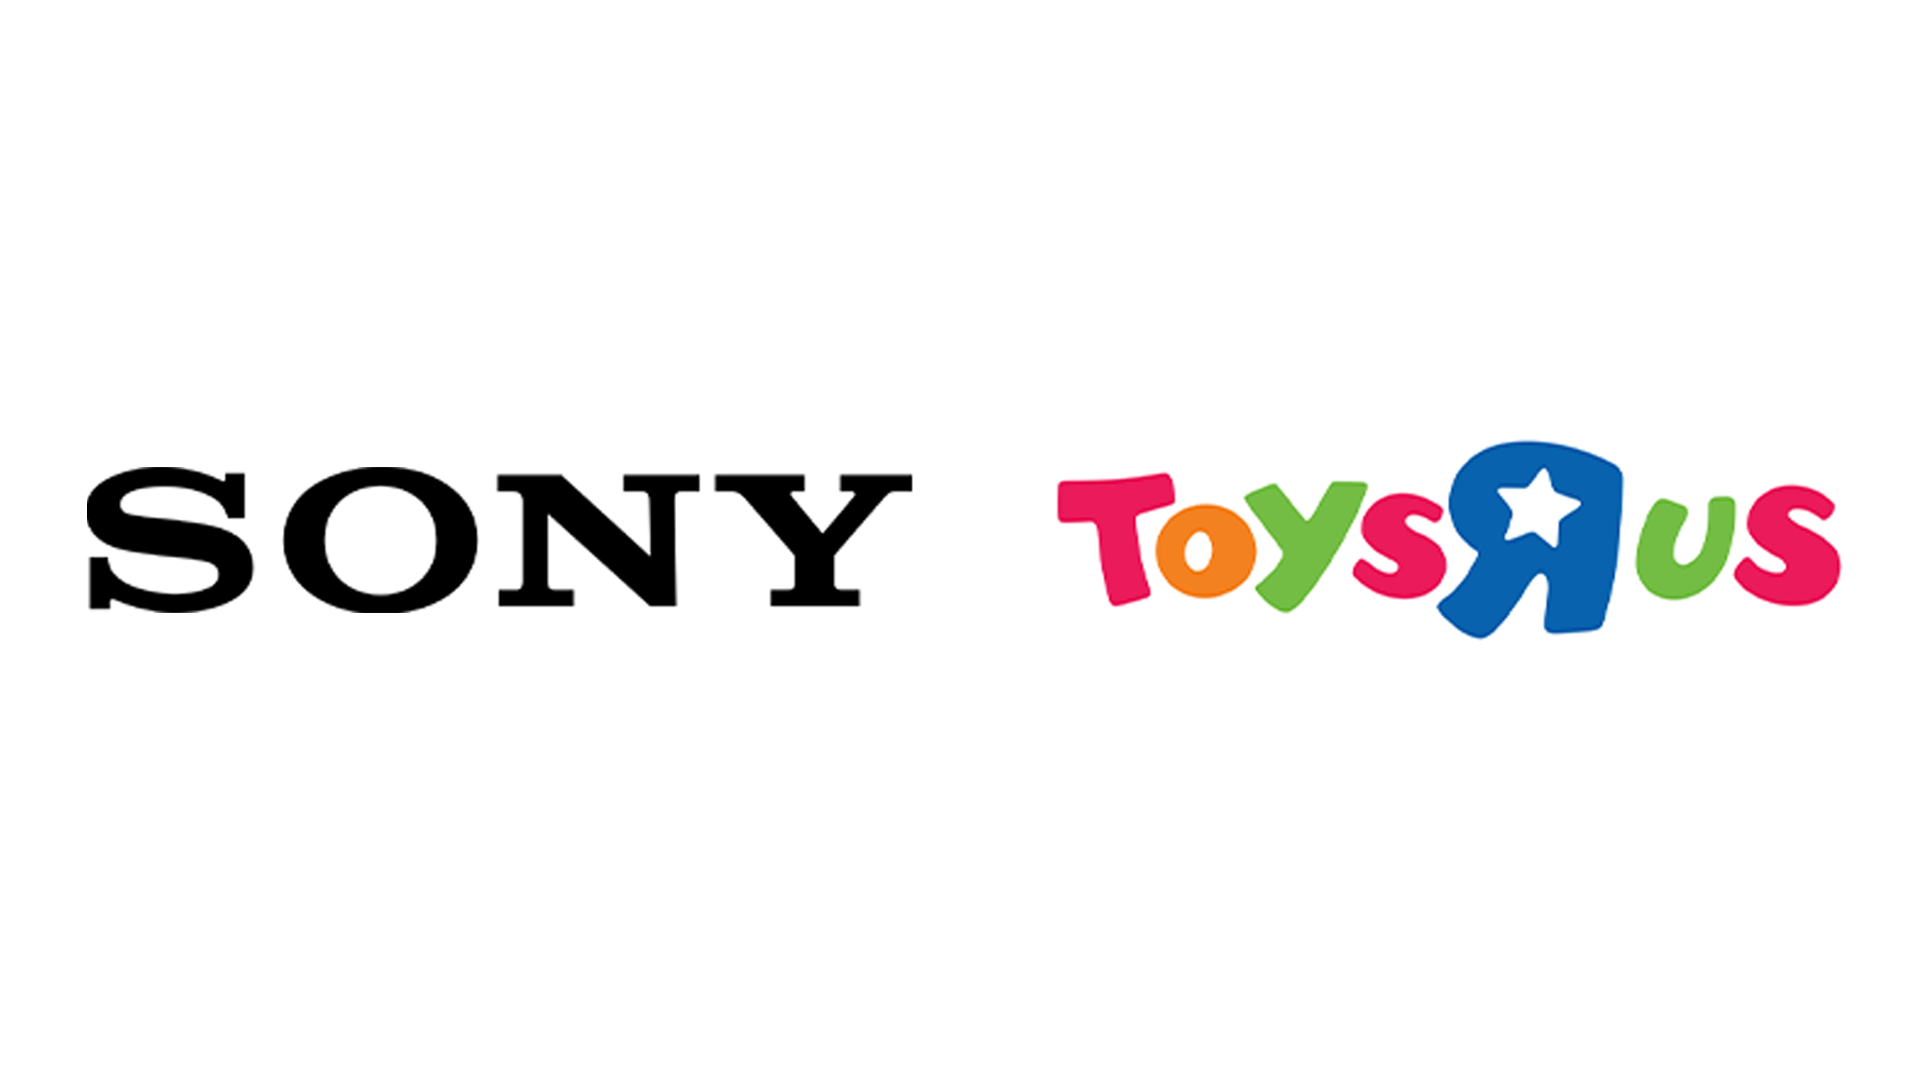 The logos of ToysRUS and SONY